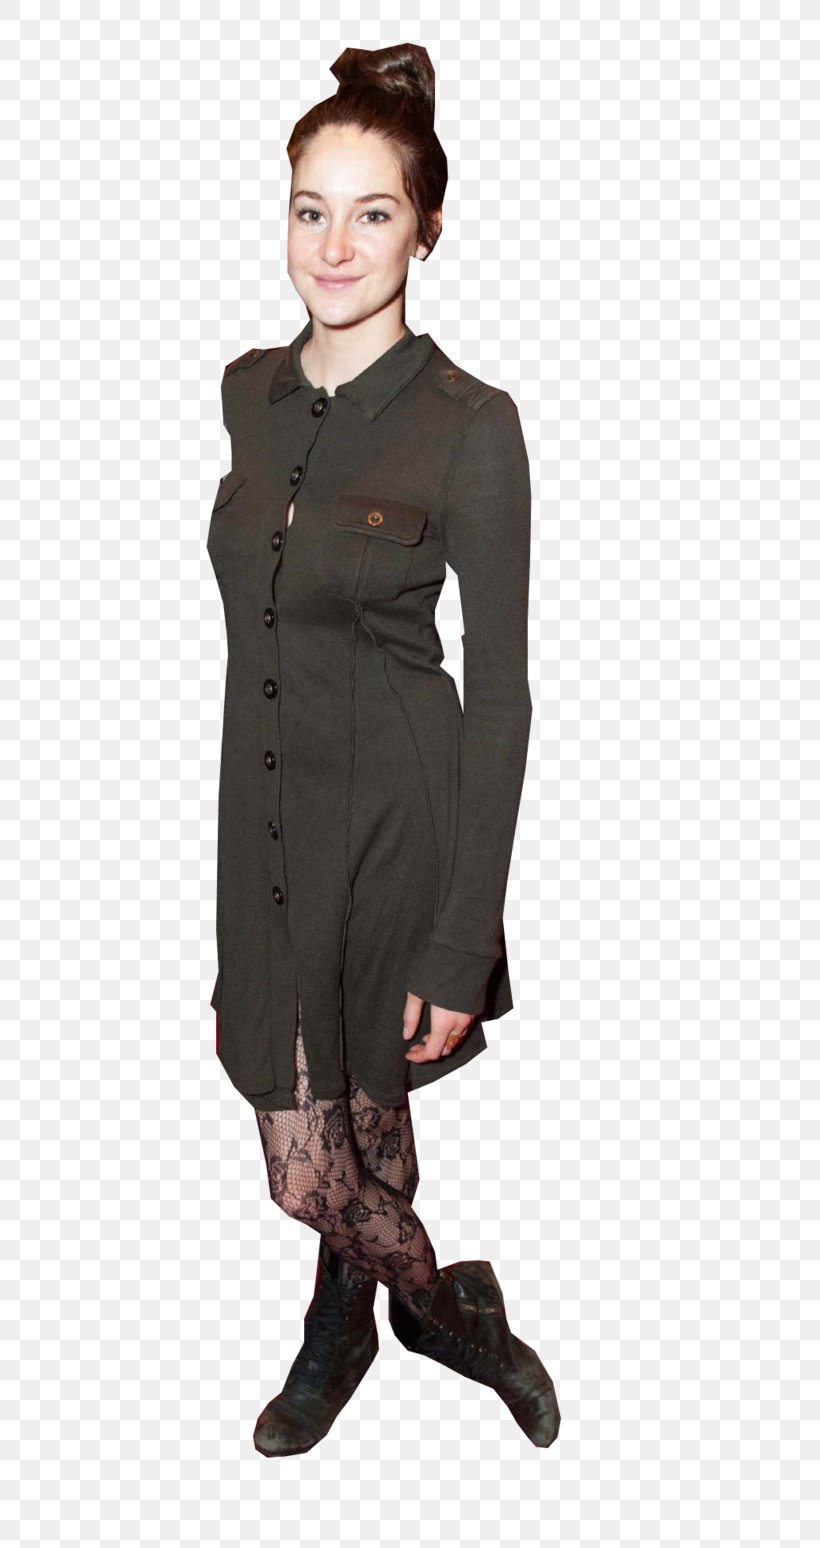 Outerwear Coat Dress Sleeve Tights, PNG, 516x1548px, Outerwear, Coat, Dress, Sleeve, Tights Download Free